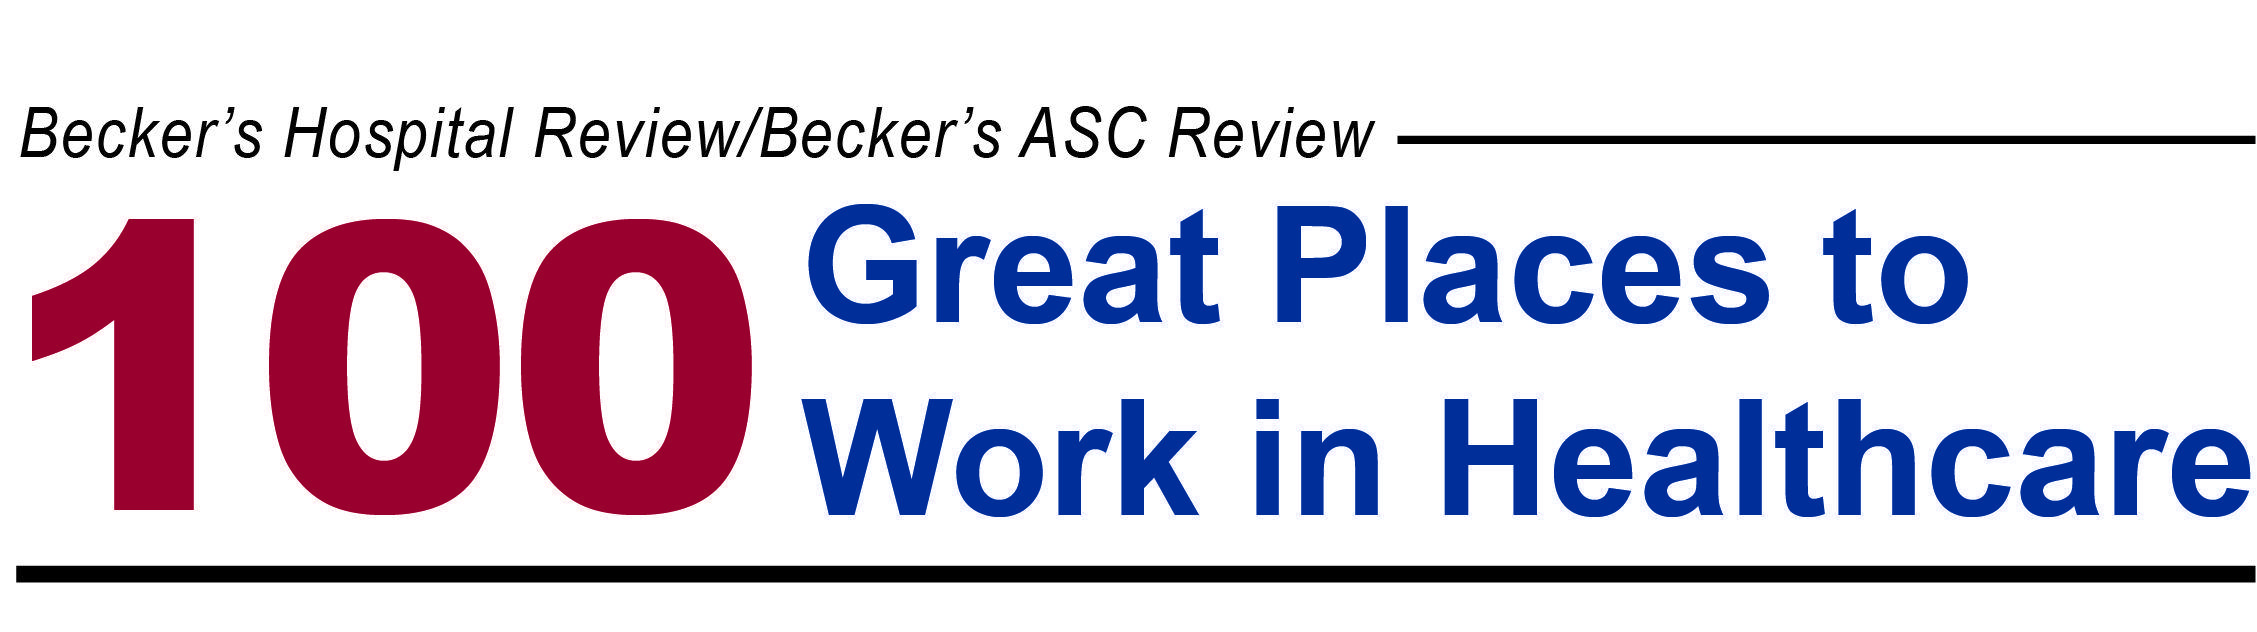 Becker's Hospital Review Logo - 100 Great Places to Work in Healthcare